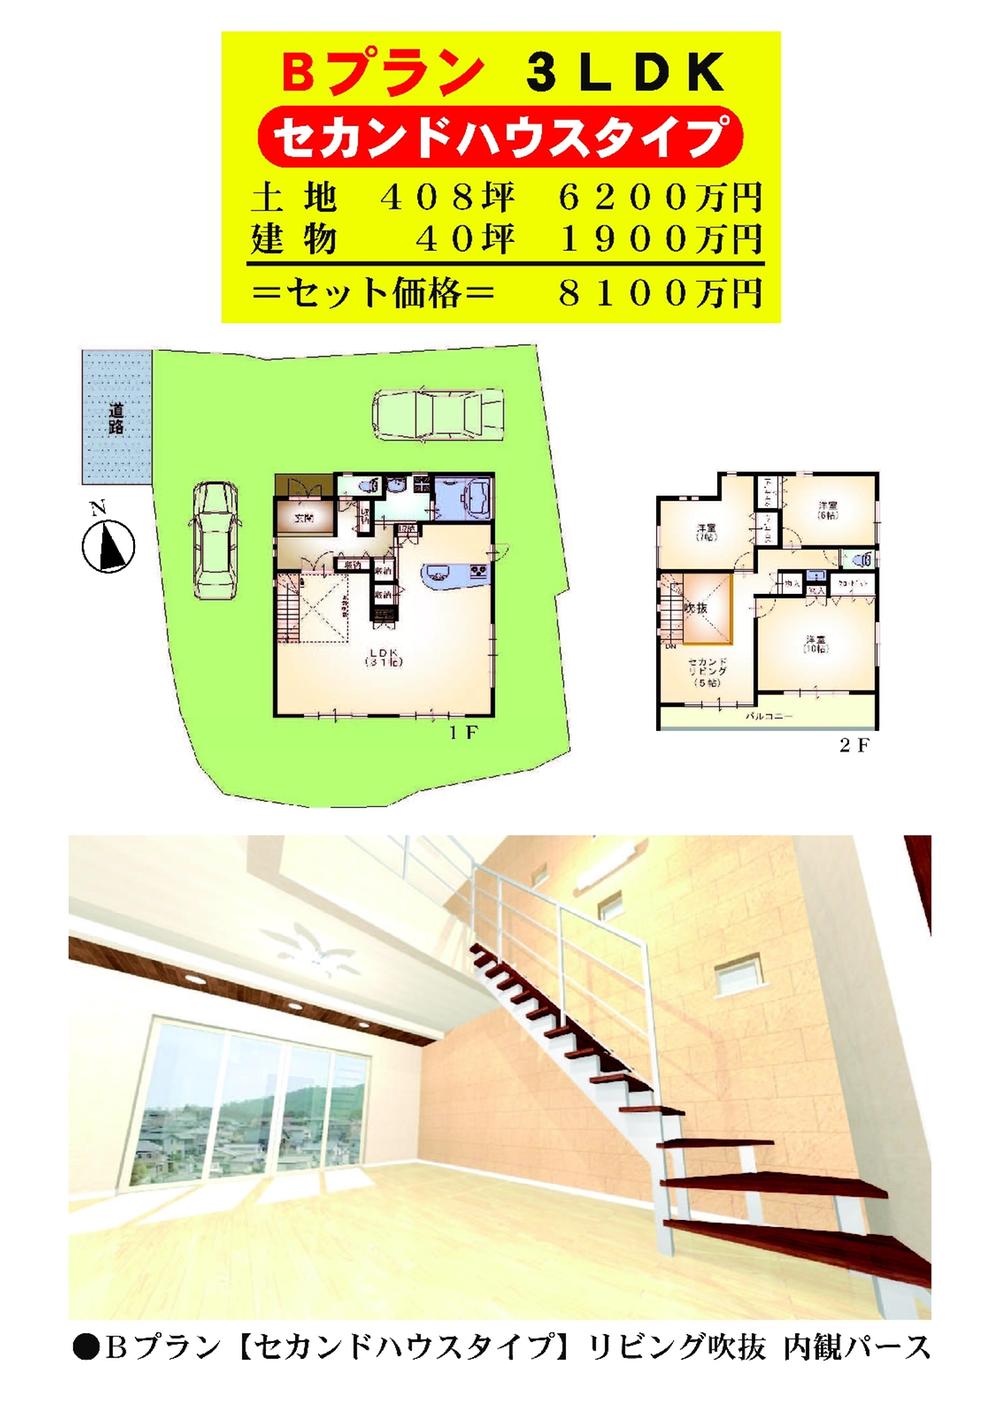 Other building plan example. ● Building Plan B ● 3LDK 40 square meters 19 million yen [You can also trade in those without building conditions. ]